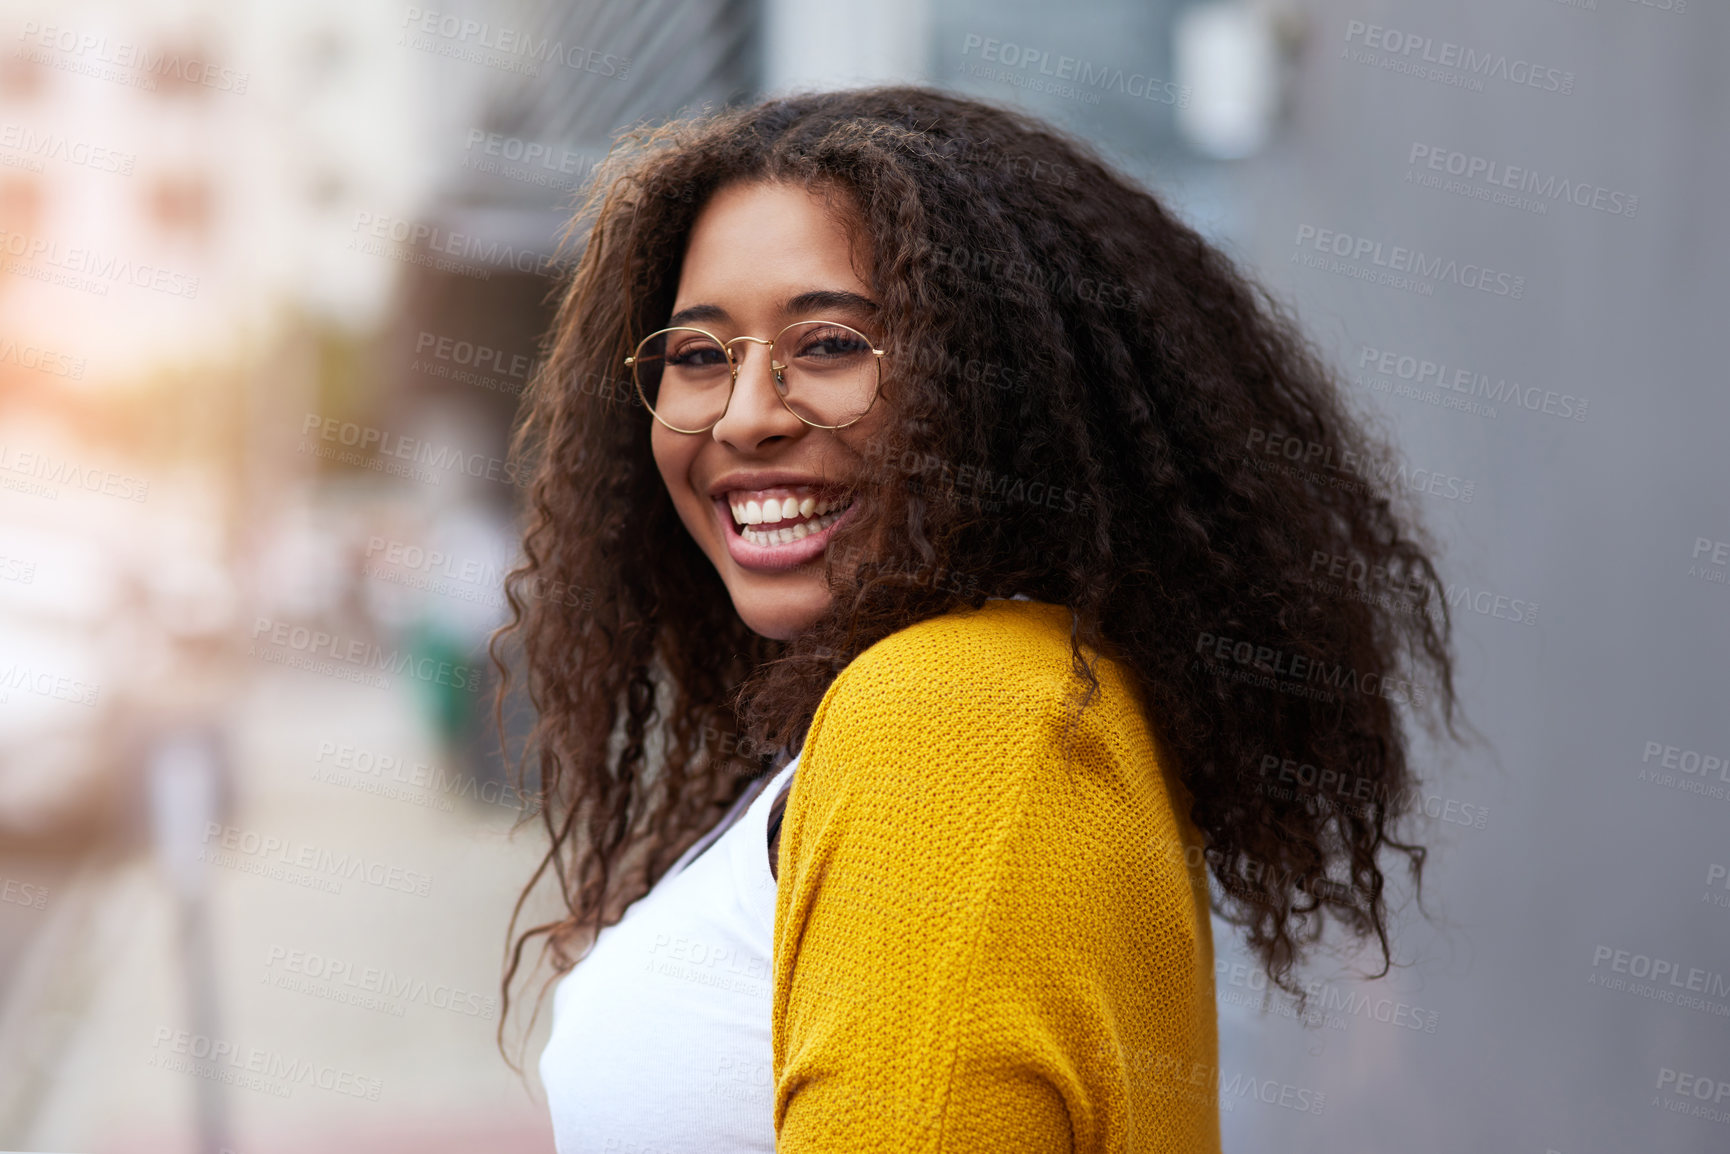 Buy stock photo Cropped portrait of a happy young woman standing outdoors in an urban setting